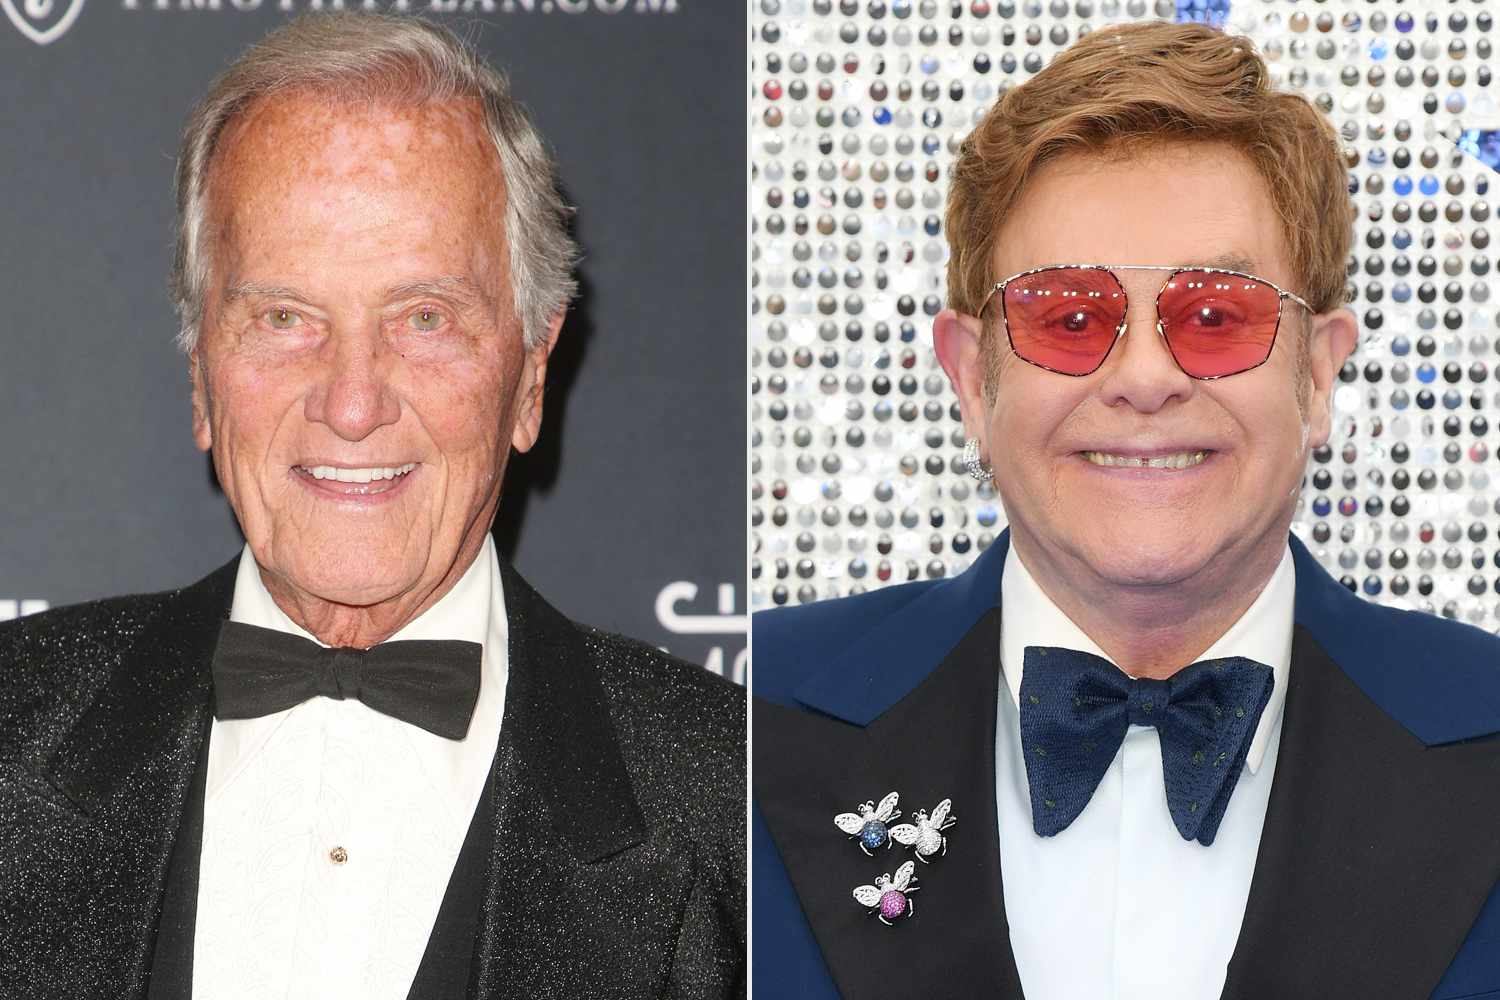 Mandatory Credit: Photo by Mediapunch/Shutterstock (9352395v) Pat Boone 26th Annual Movieguide Awards, Arrivals, Los Angeles, USA - 02 Feb 2018; LONDON, ENGLAND - MAY 20: Elton John attends the "Rocketman" UK premiere at Odeon Luxe Leicester Square on May 20, 2019 in London, England. (Photo by Karwai Tang/WireImage)